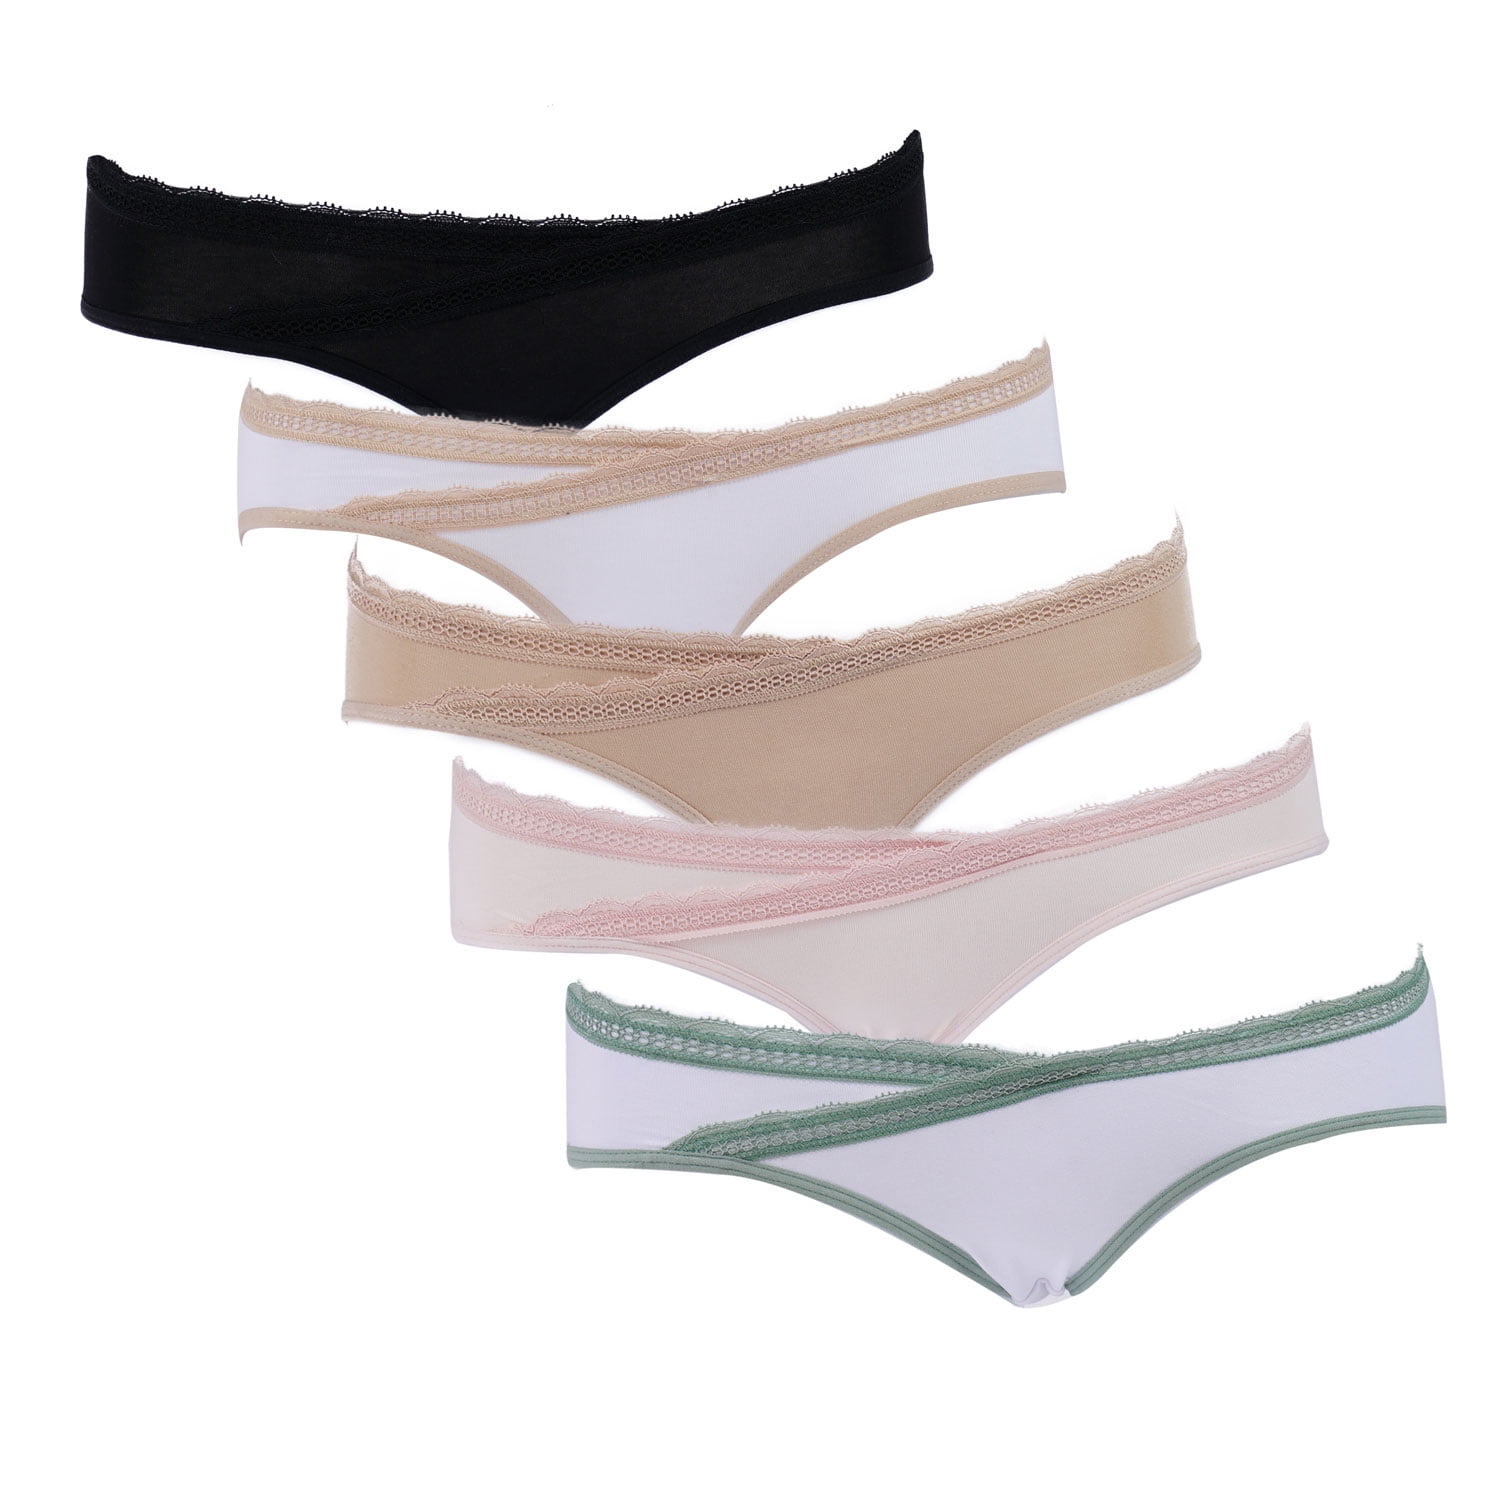 Tash Baby Store - Disposable Maternity Panties⠀ 💵💳Buy @ Ksh 499/-✓⠀  🌞Free size.⠀ 🌞5 pieces in one pack⠀ 🌞Soft, comfortable, and absorbent.